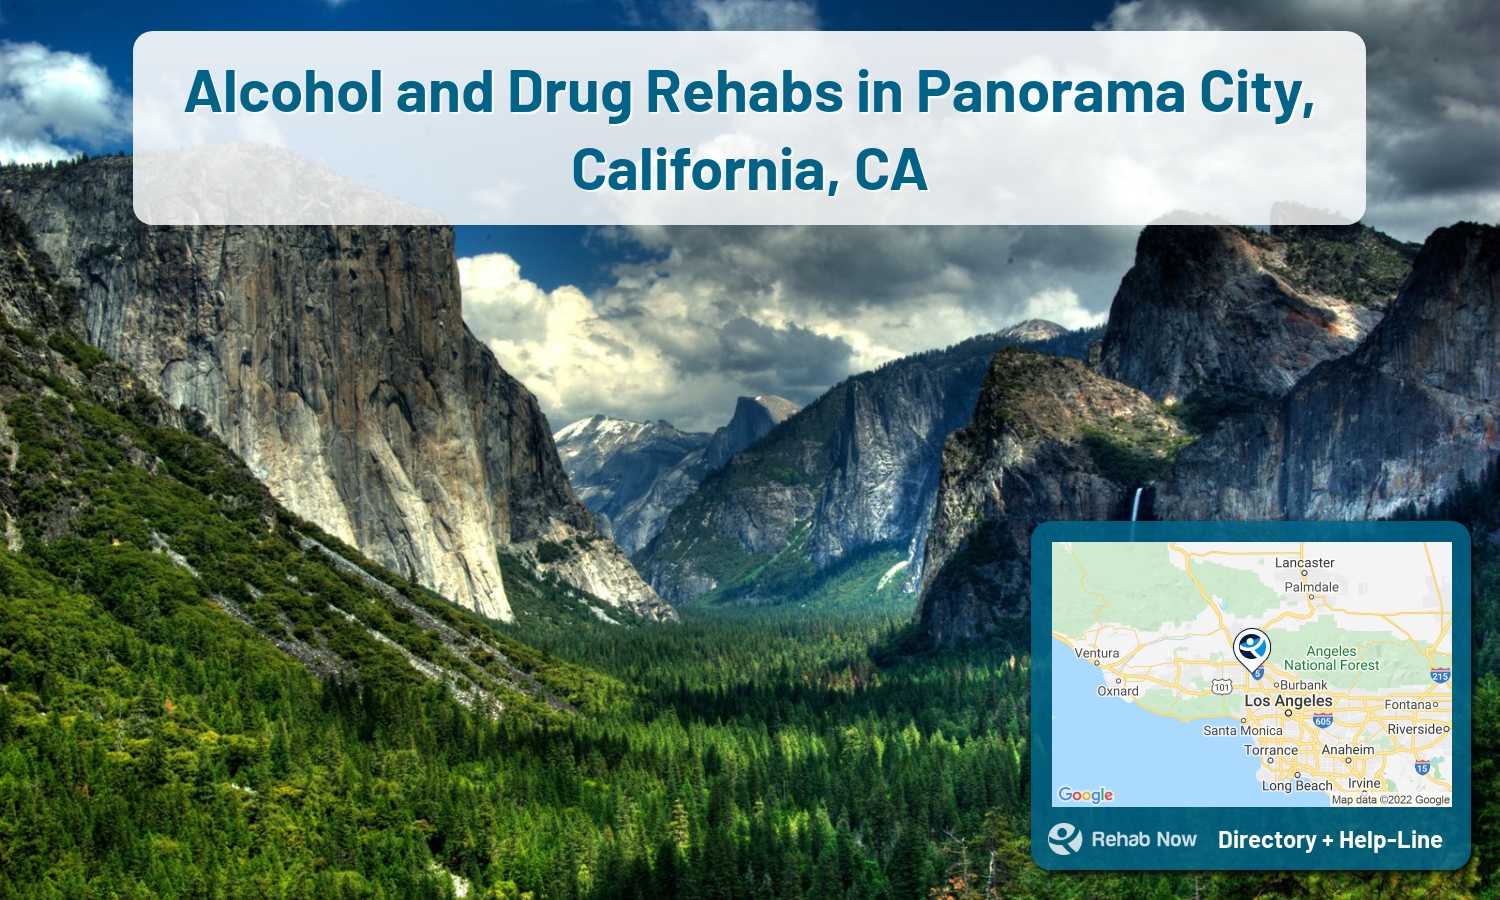 Panorama City, CA Treatment Centers. Find drug rehab in Panorama City, California, or detox and treatment programs. Get the right help now!